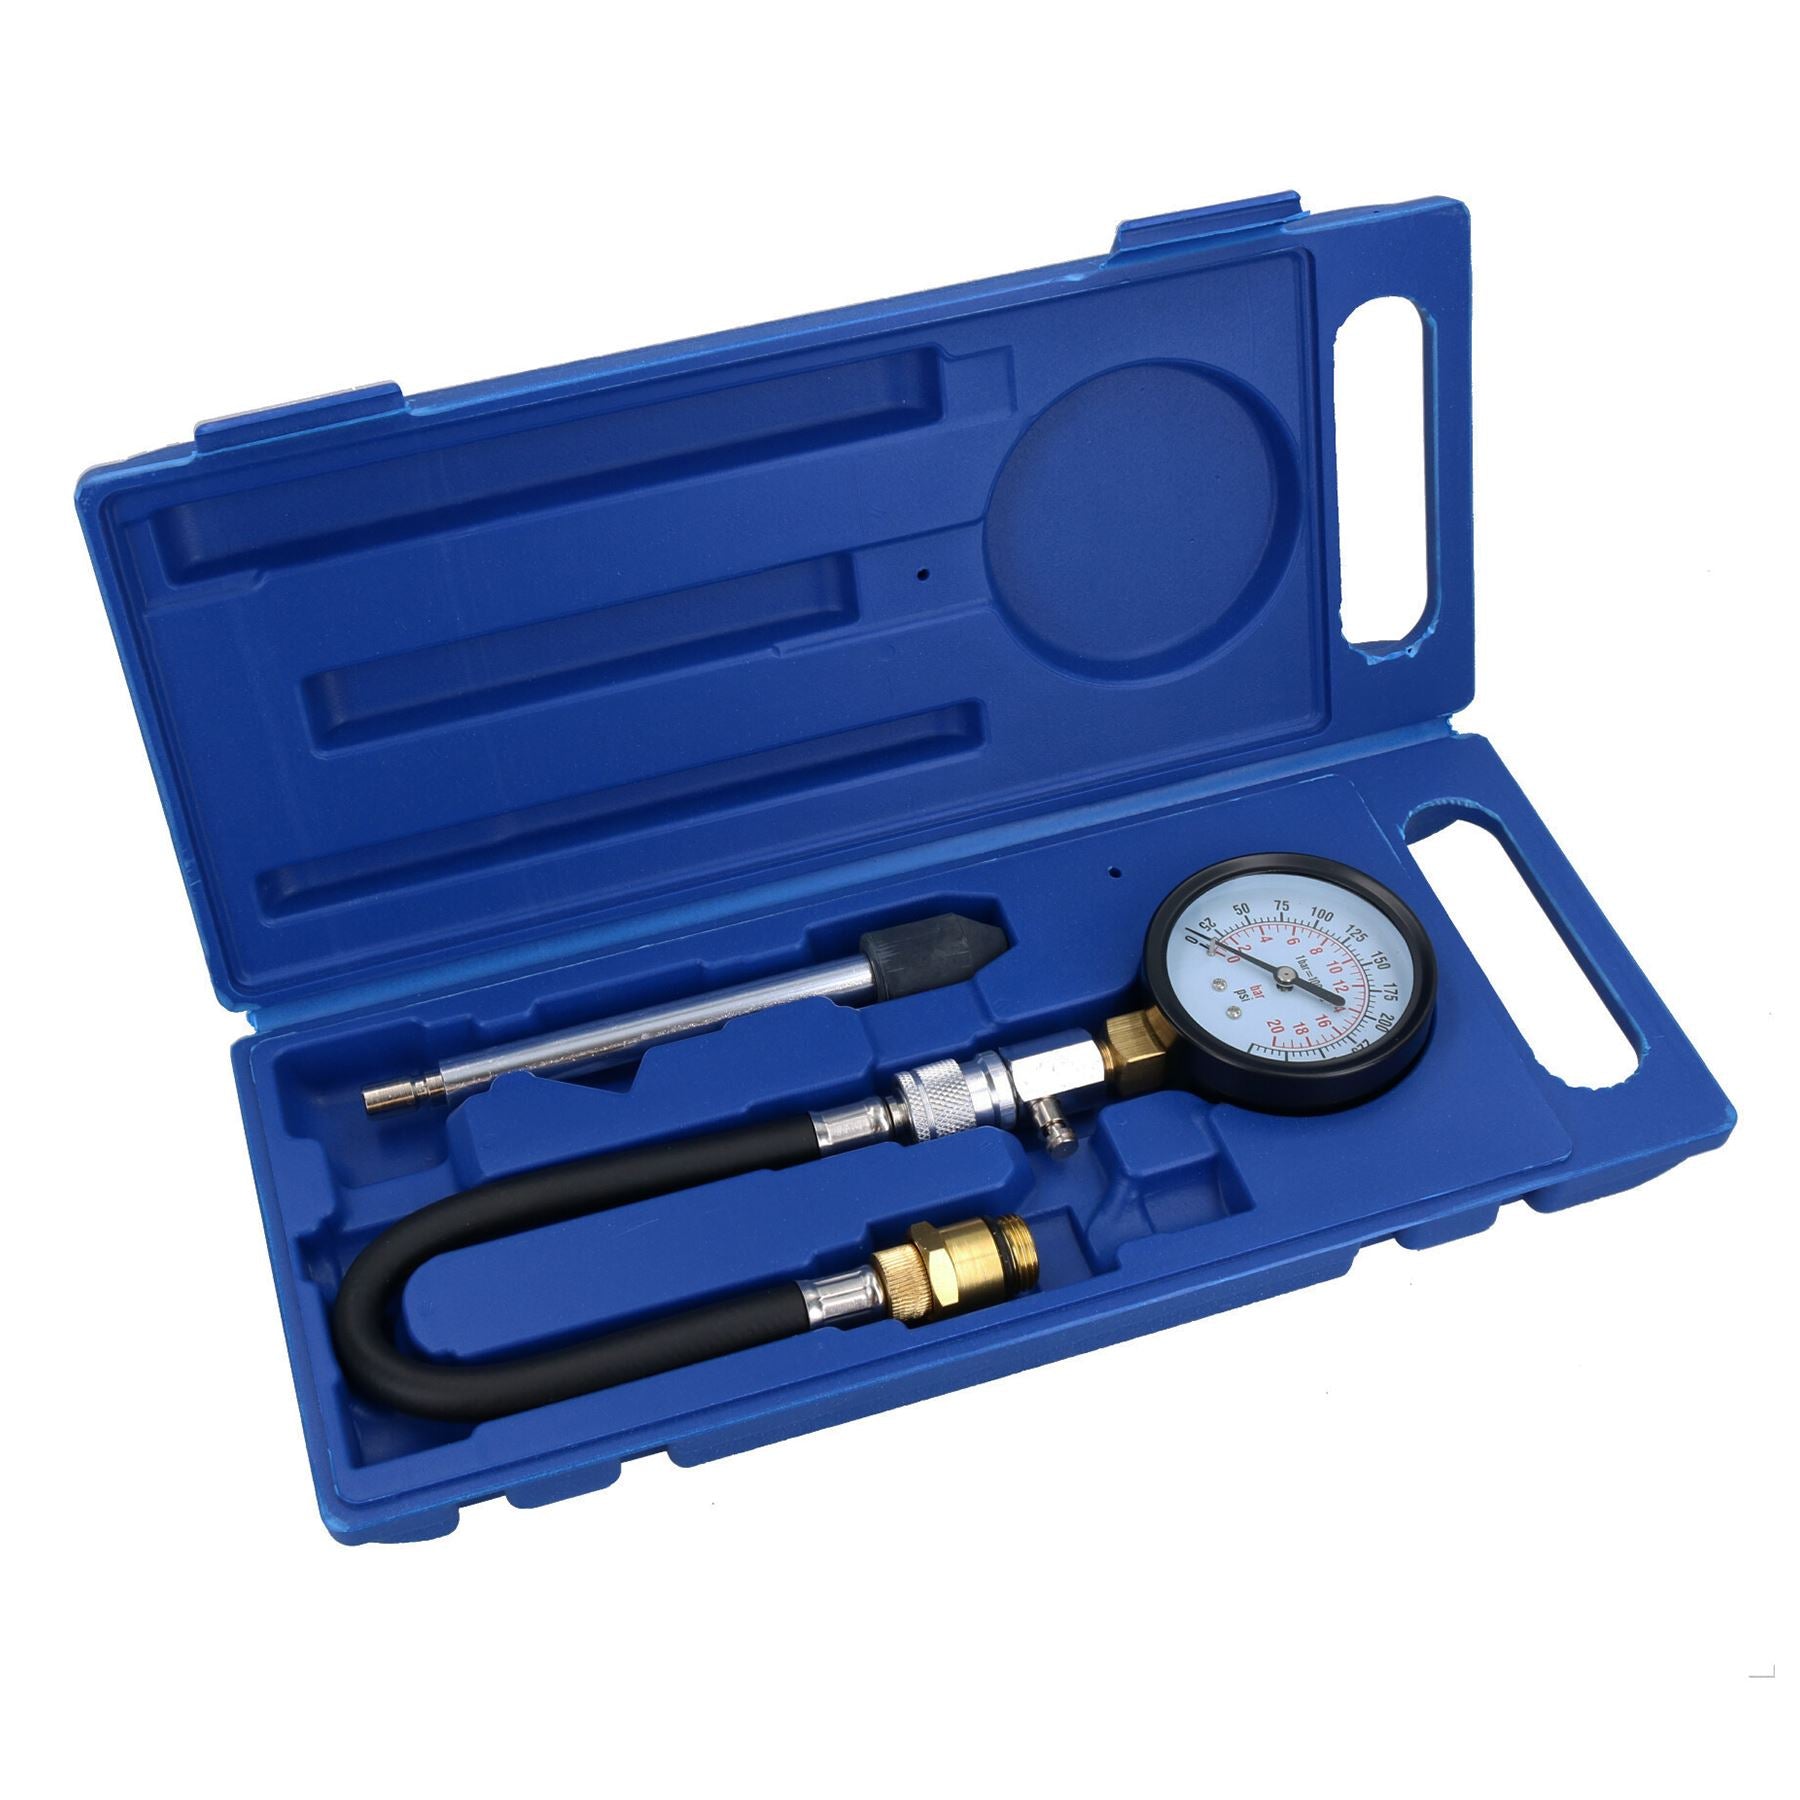 Compression tester kit for petrol engines 0-300psi / 0-2000kpa 14 & 18mm AT460